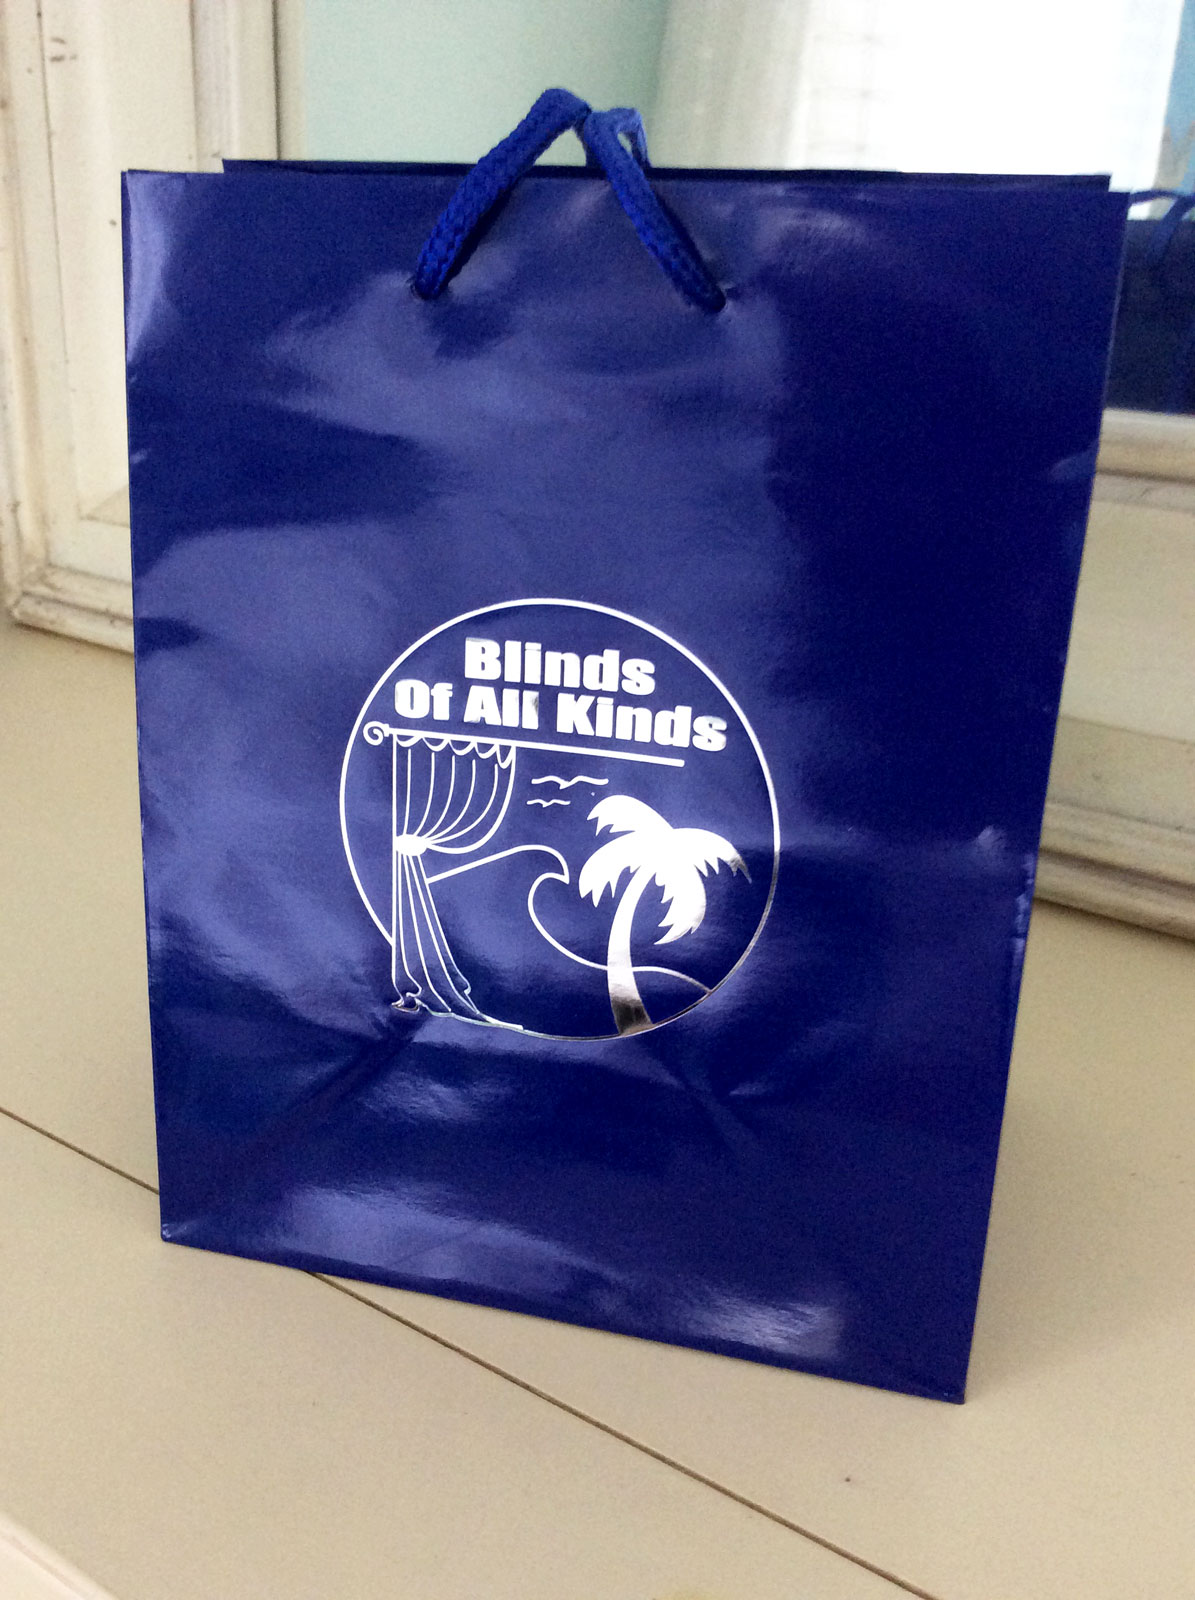 New Bags Printed for Blinds of All Kinds 01